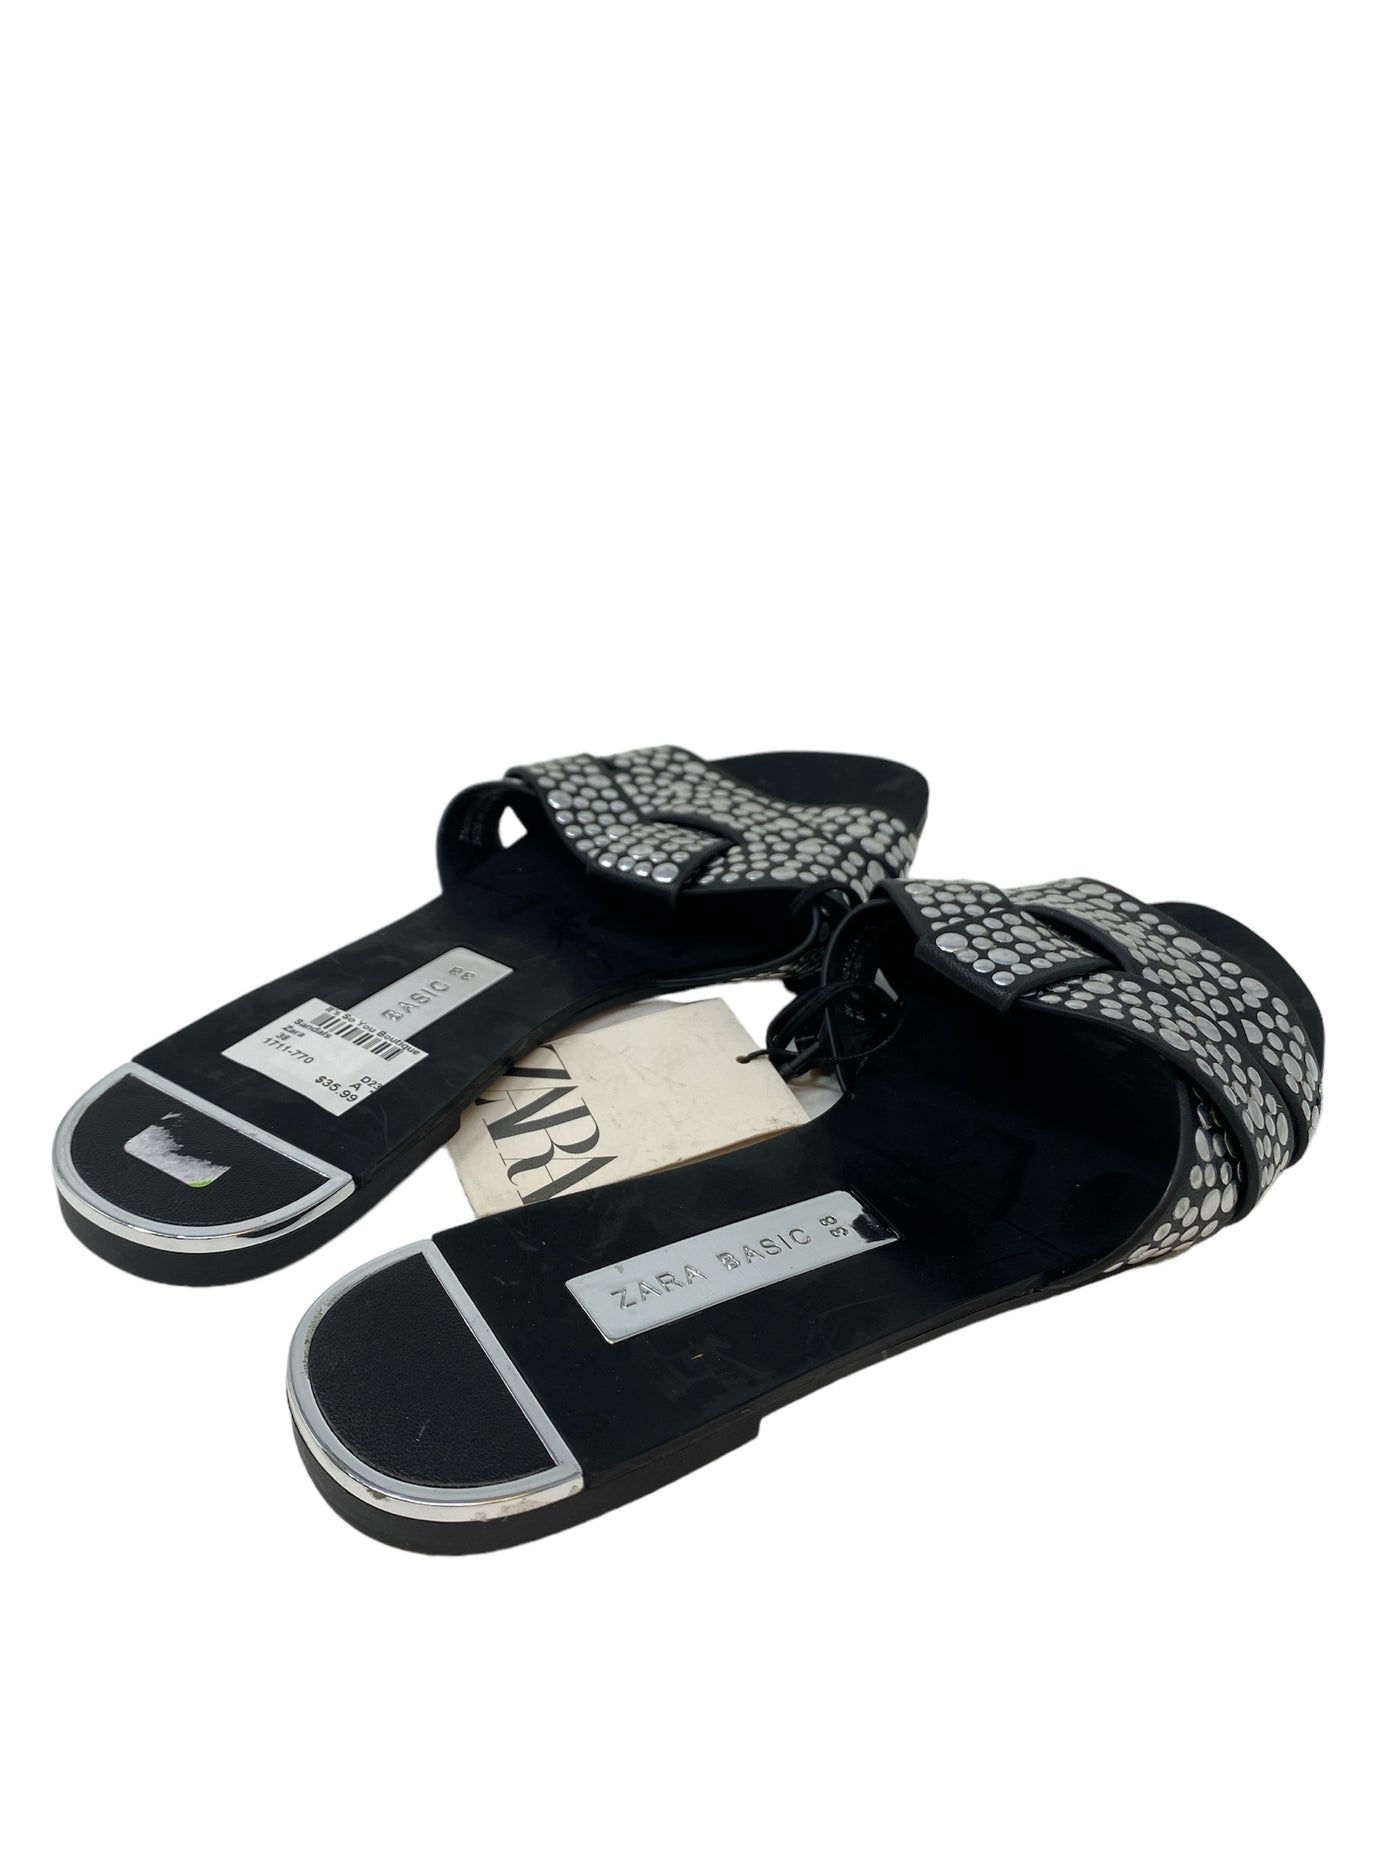 Zara Women Size 38 Black Print New With Tags Sandals